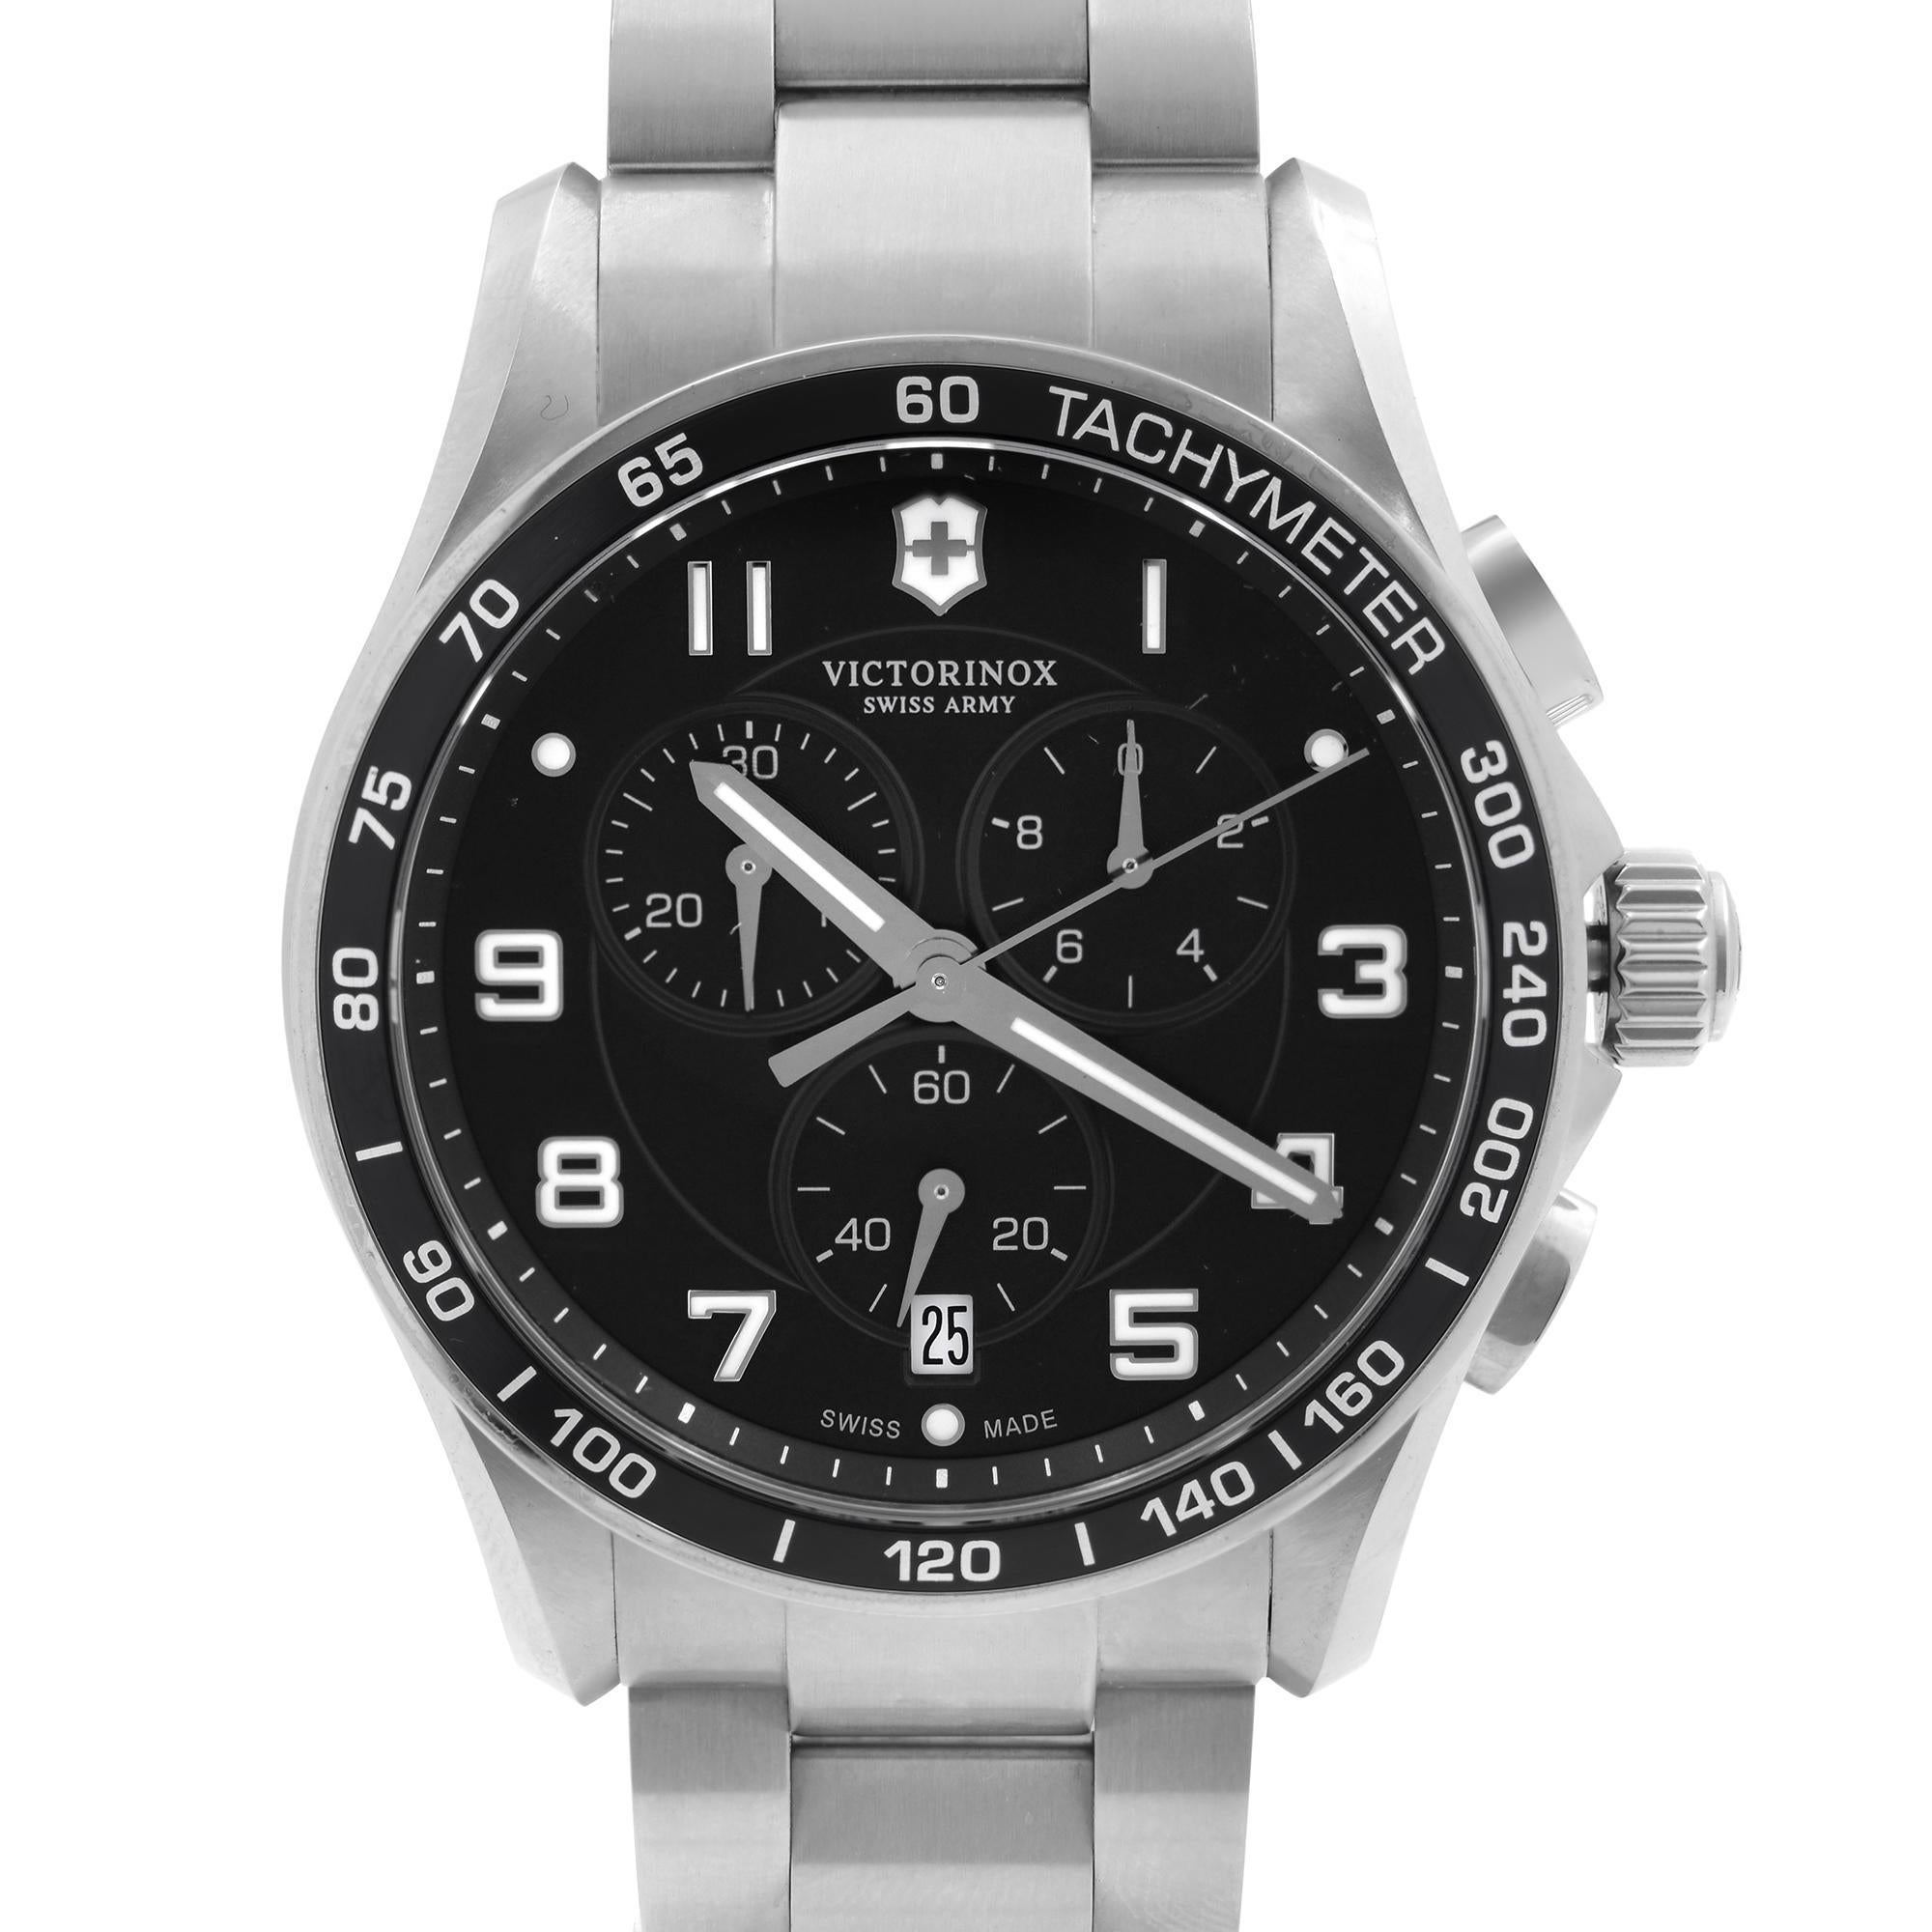 Display Model Victorinox Chrono Classic XLS Stainless Steel Black Dial Men Quartz Watch 241650. This Beautiful Timepiece is Powered by Quartz (Battery) Movement And Features: Round Stainless Steel Case & Bracelet, Fixed Stainless Steel Bezel with a